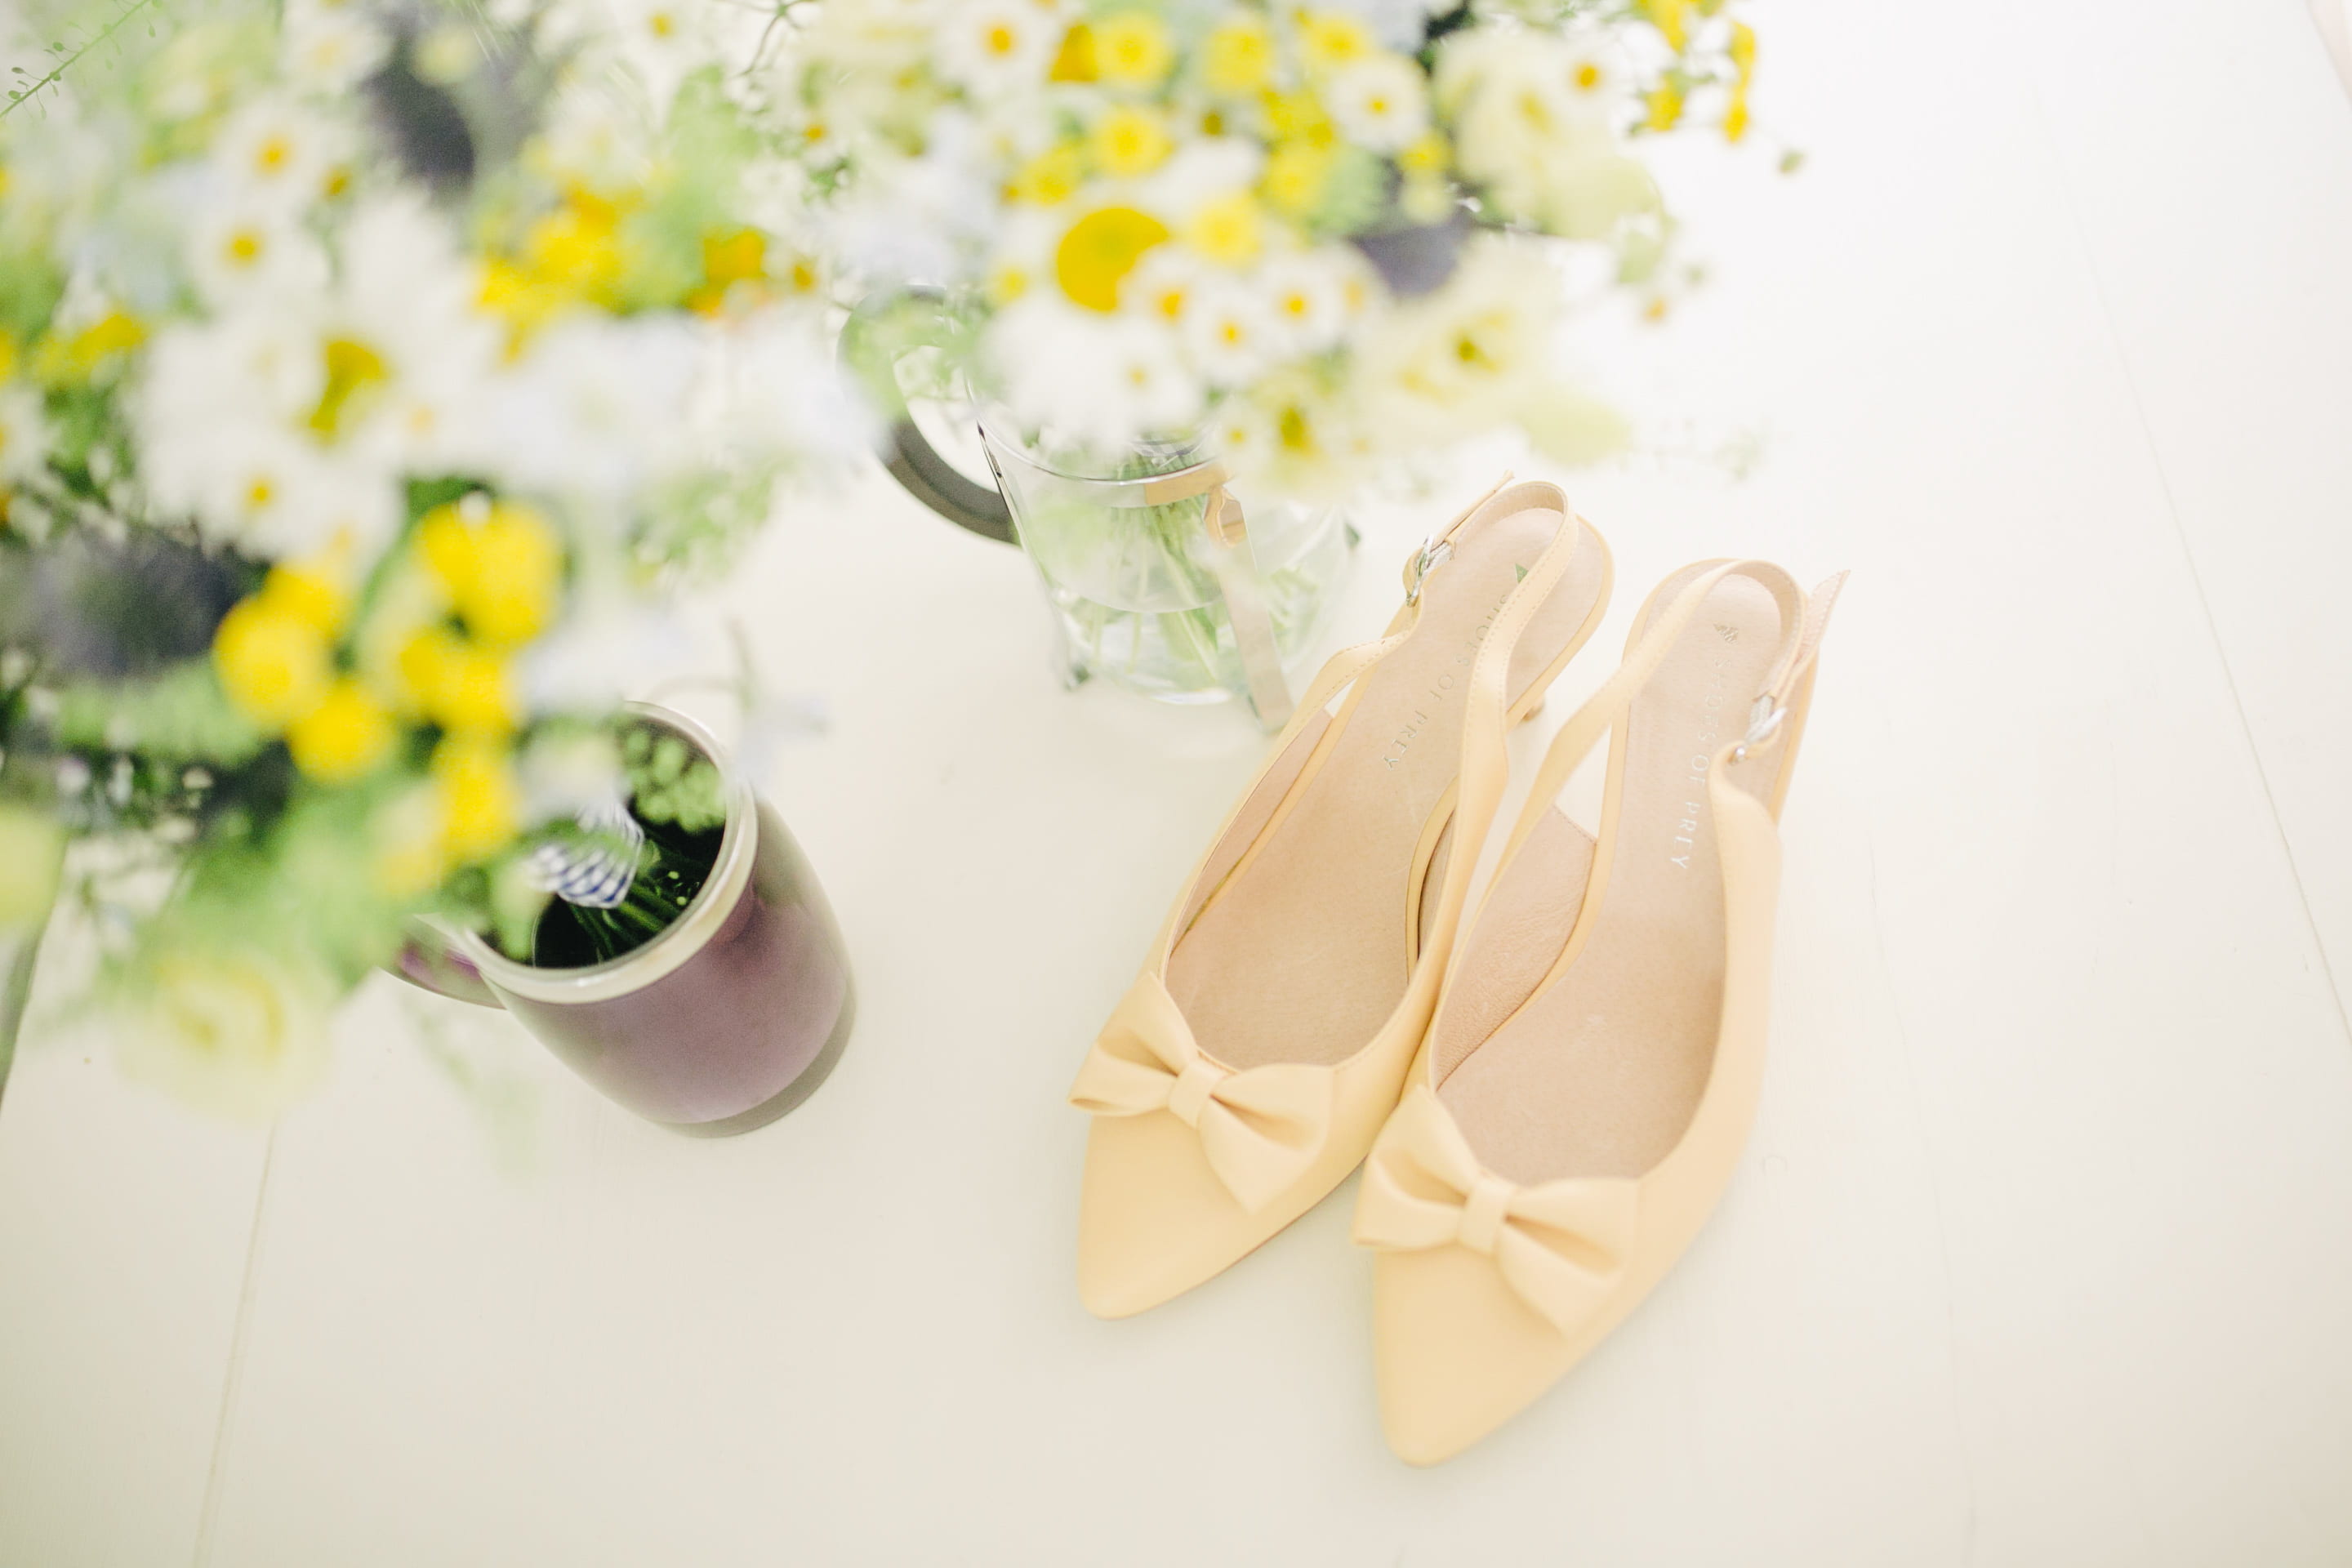 pair of women's beige pointed-toe slingback pumps with ribbons near flower vase, pair of yellow slingback strap stilettos